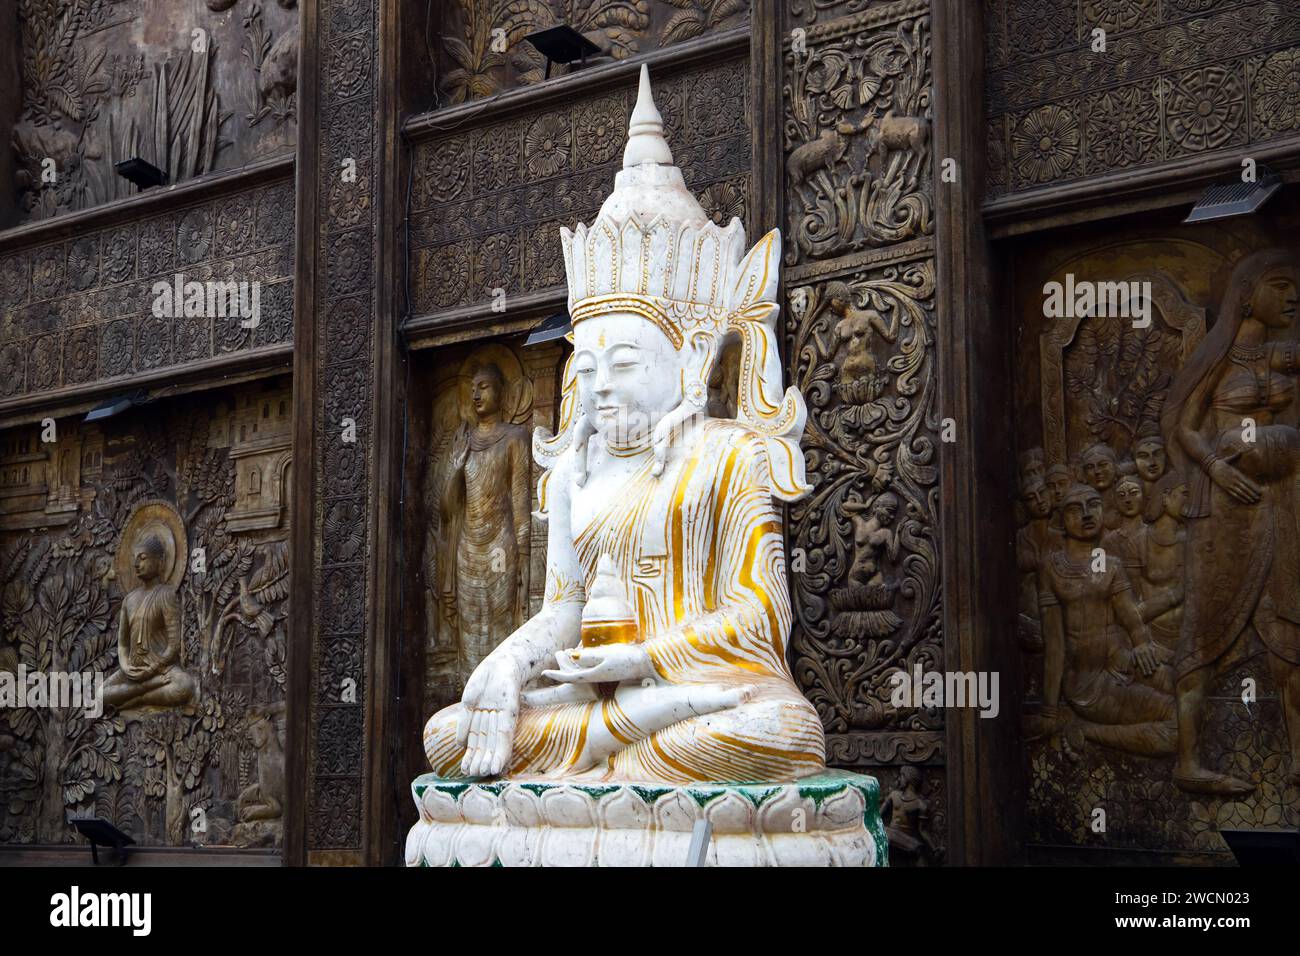 White Buddha statue at Gangaramaya Temple, it is one of the most important temples in Colombo, Sri Lanka Stock Photo